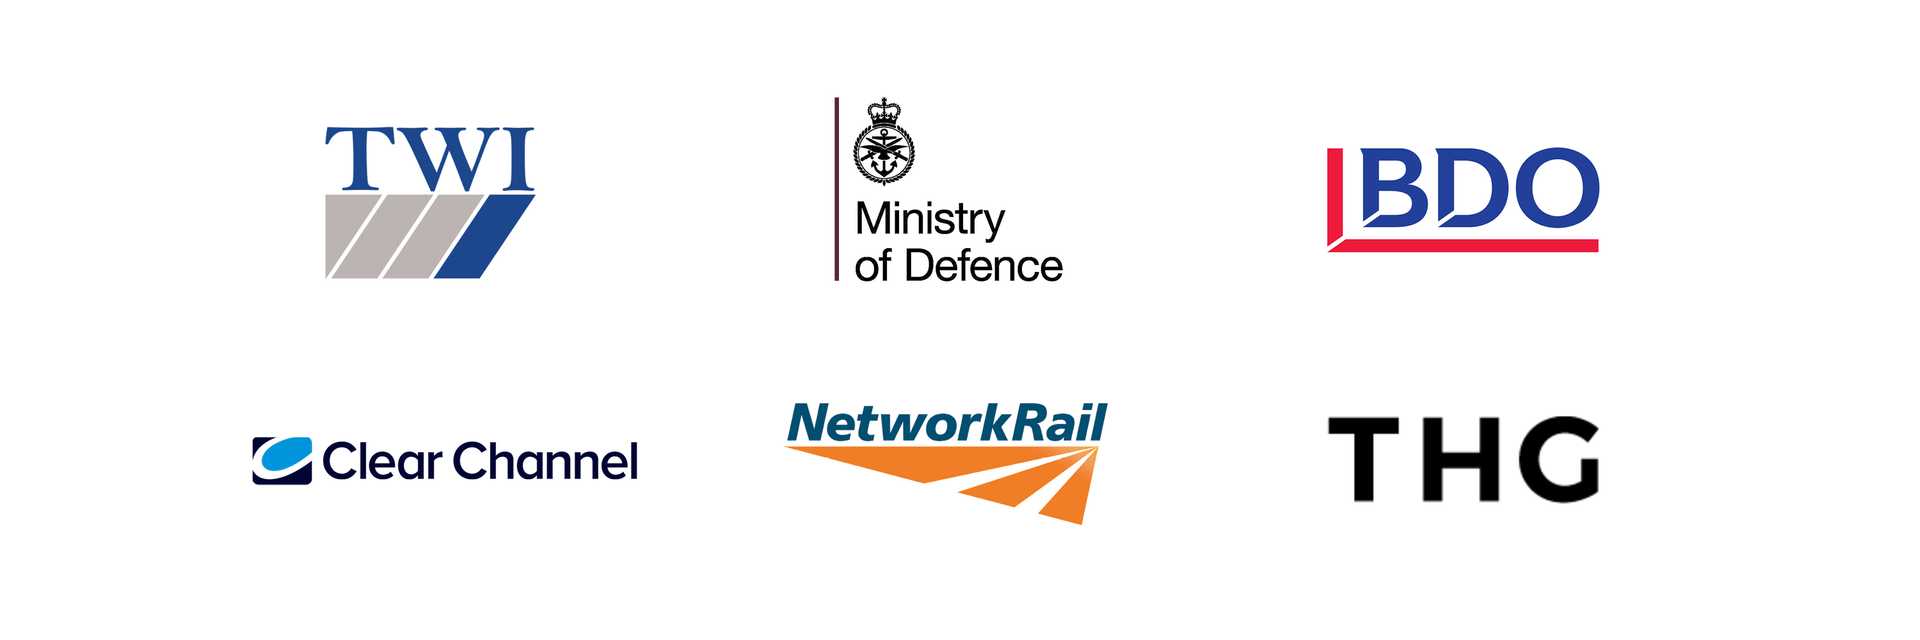 Logos for TWI, Ministry of Defence, BDO, Clear Channel, Network Rail, THG